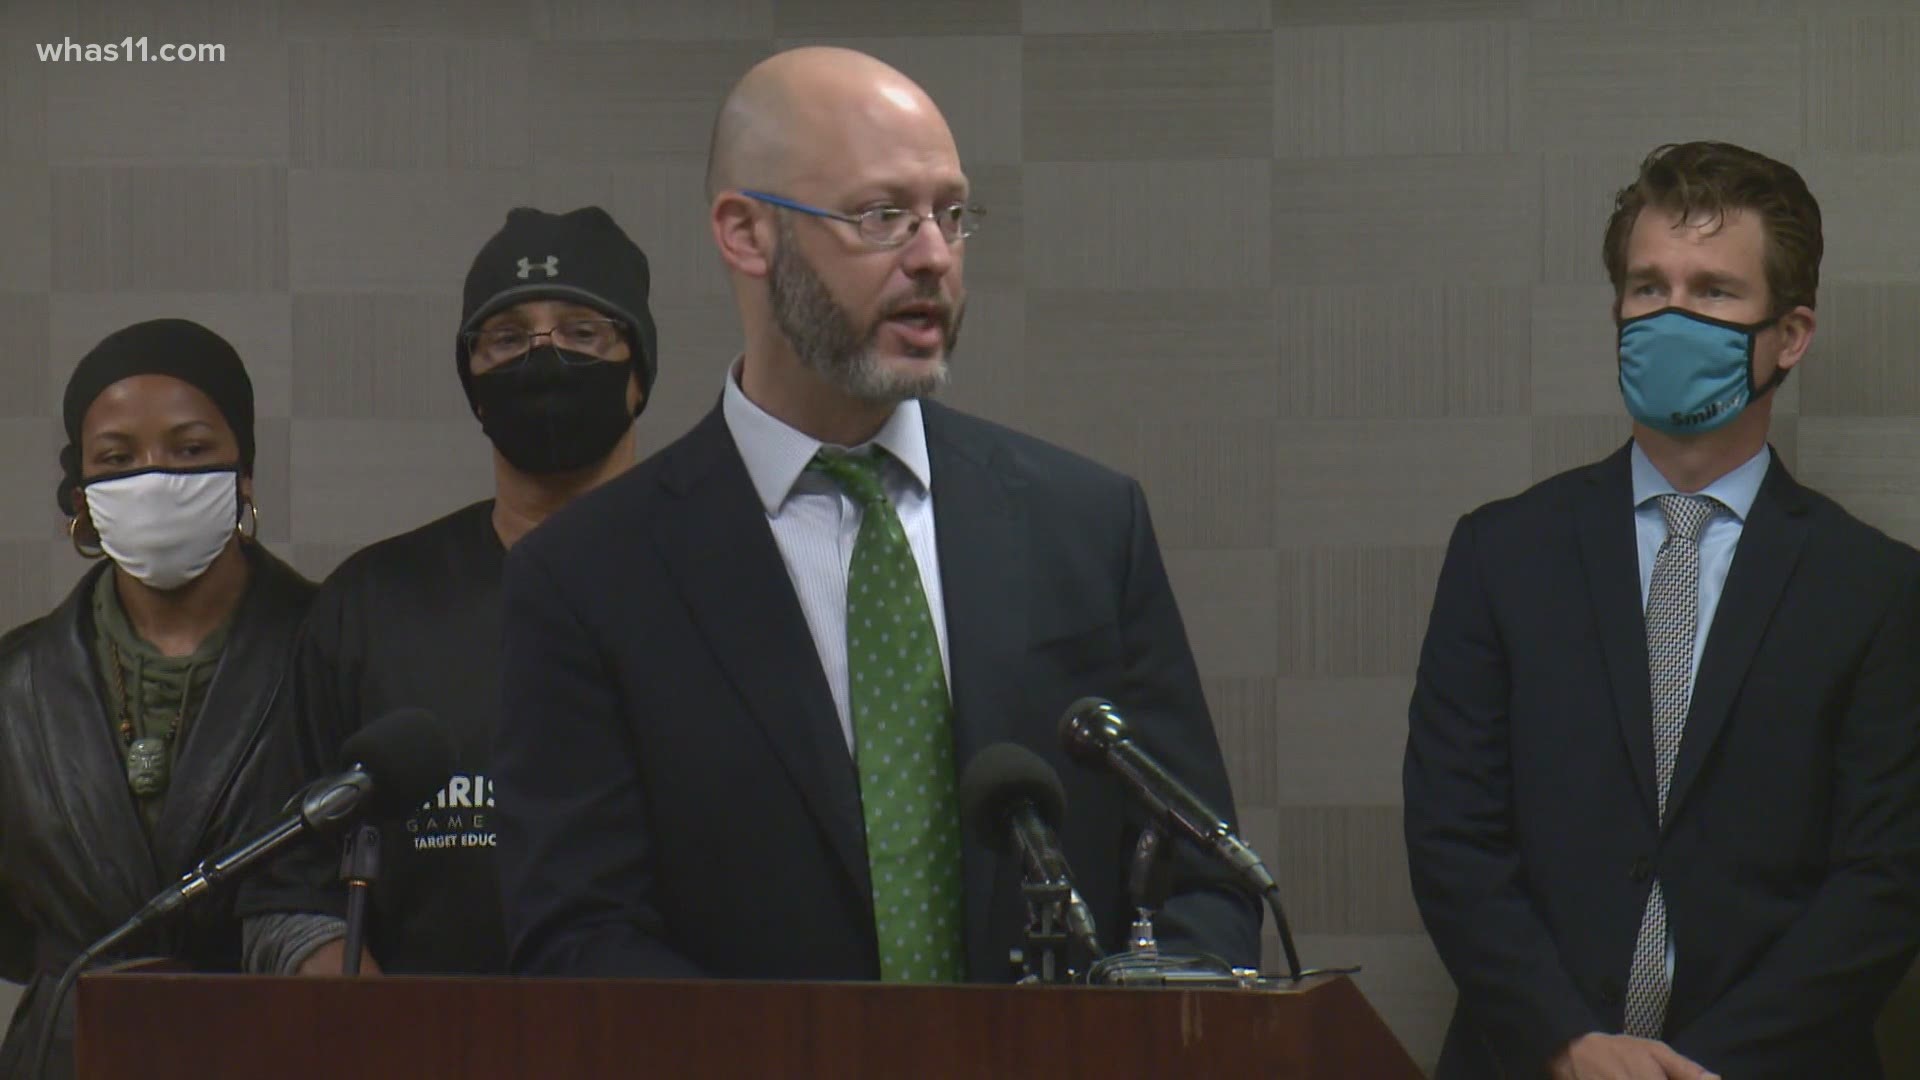 Attorneys spoke about their ongoing attempt to grant anonymous grand jurors the right to speak freely about the case.